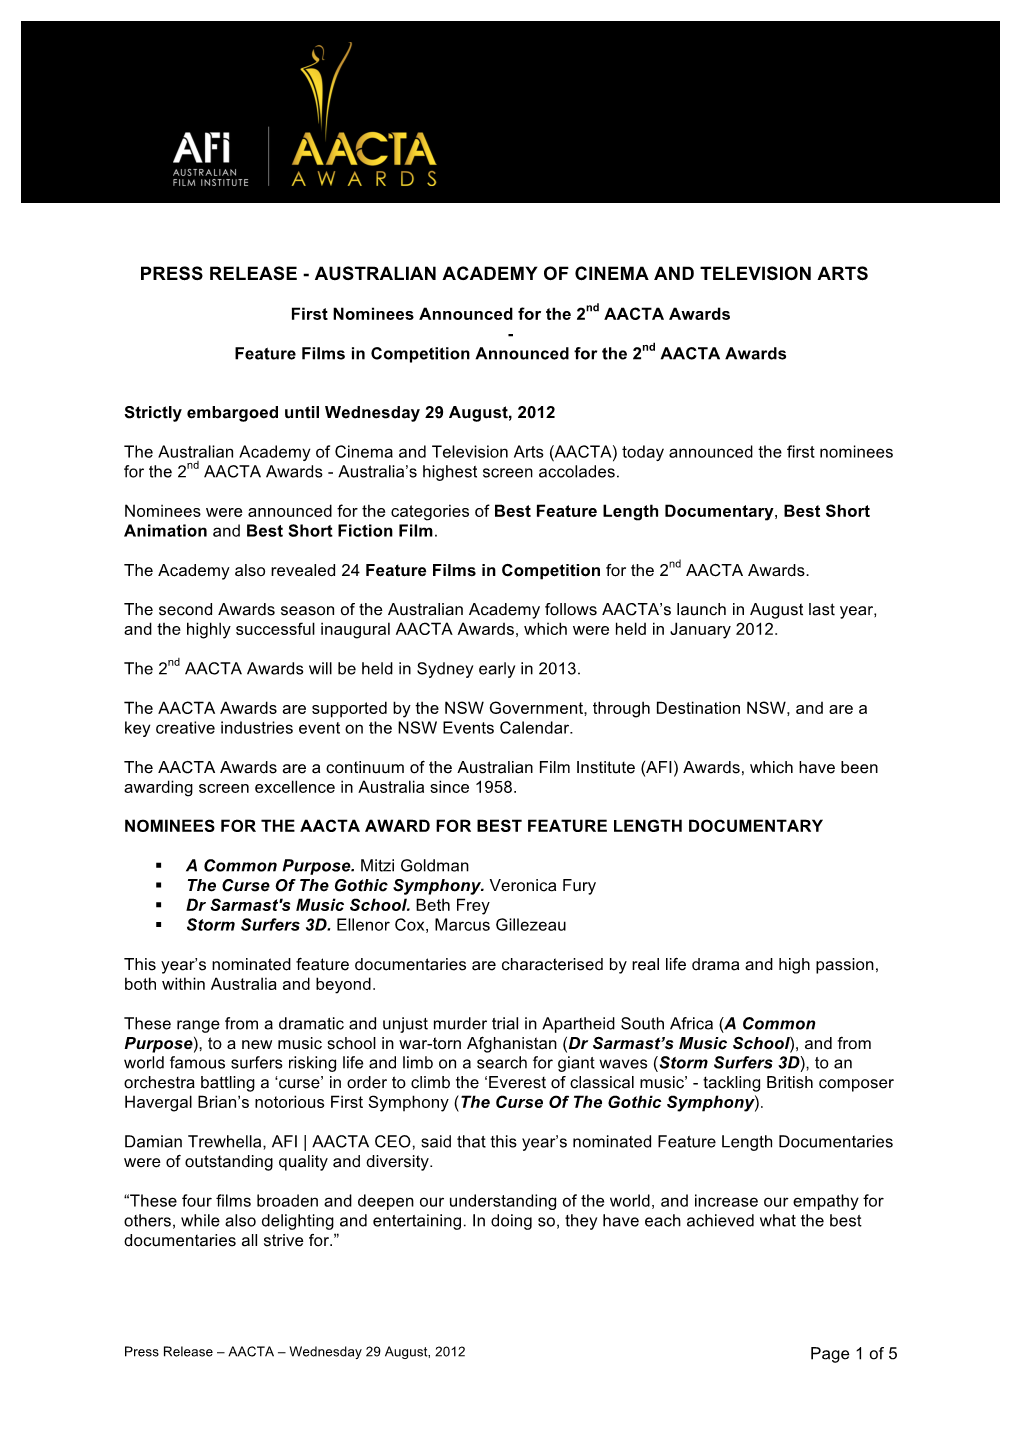 Press Release - Australian Academy of Cinema and Television Arts